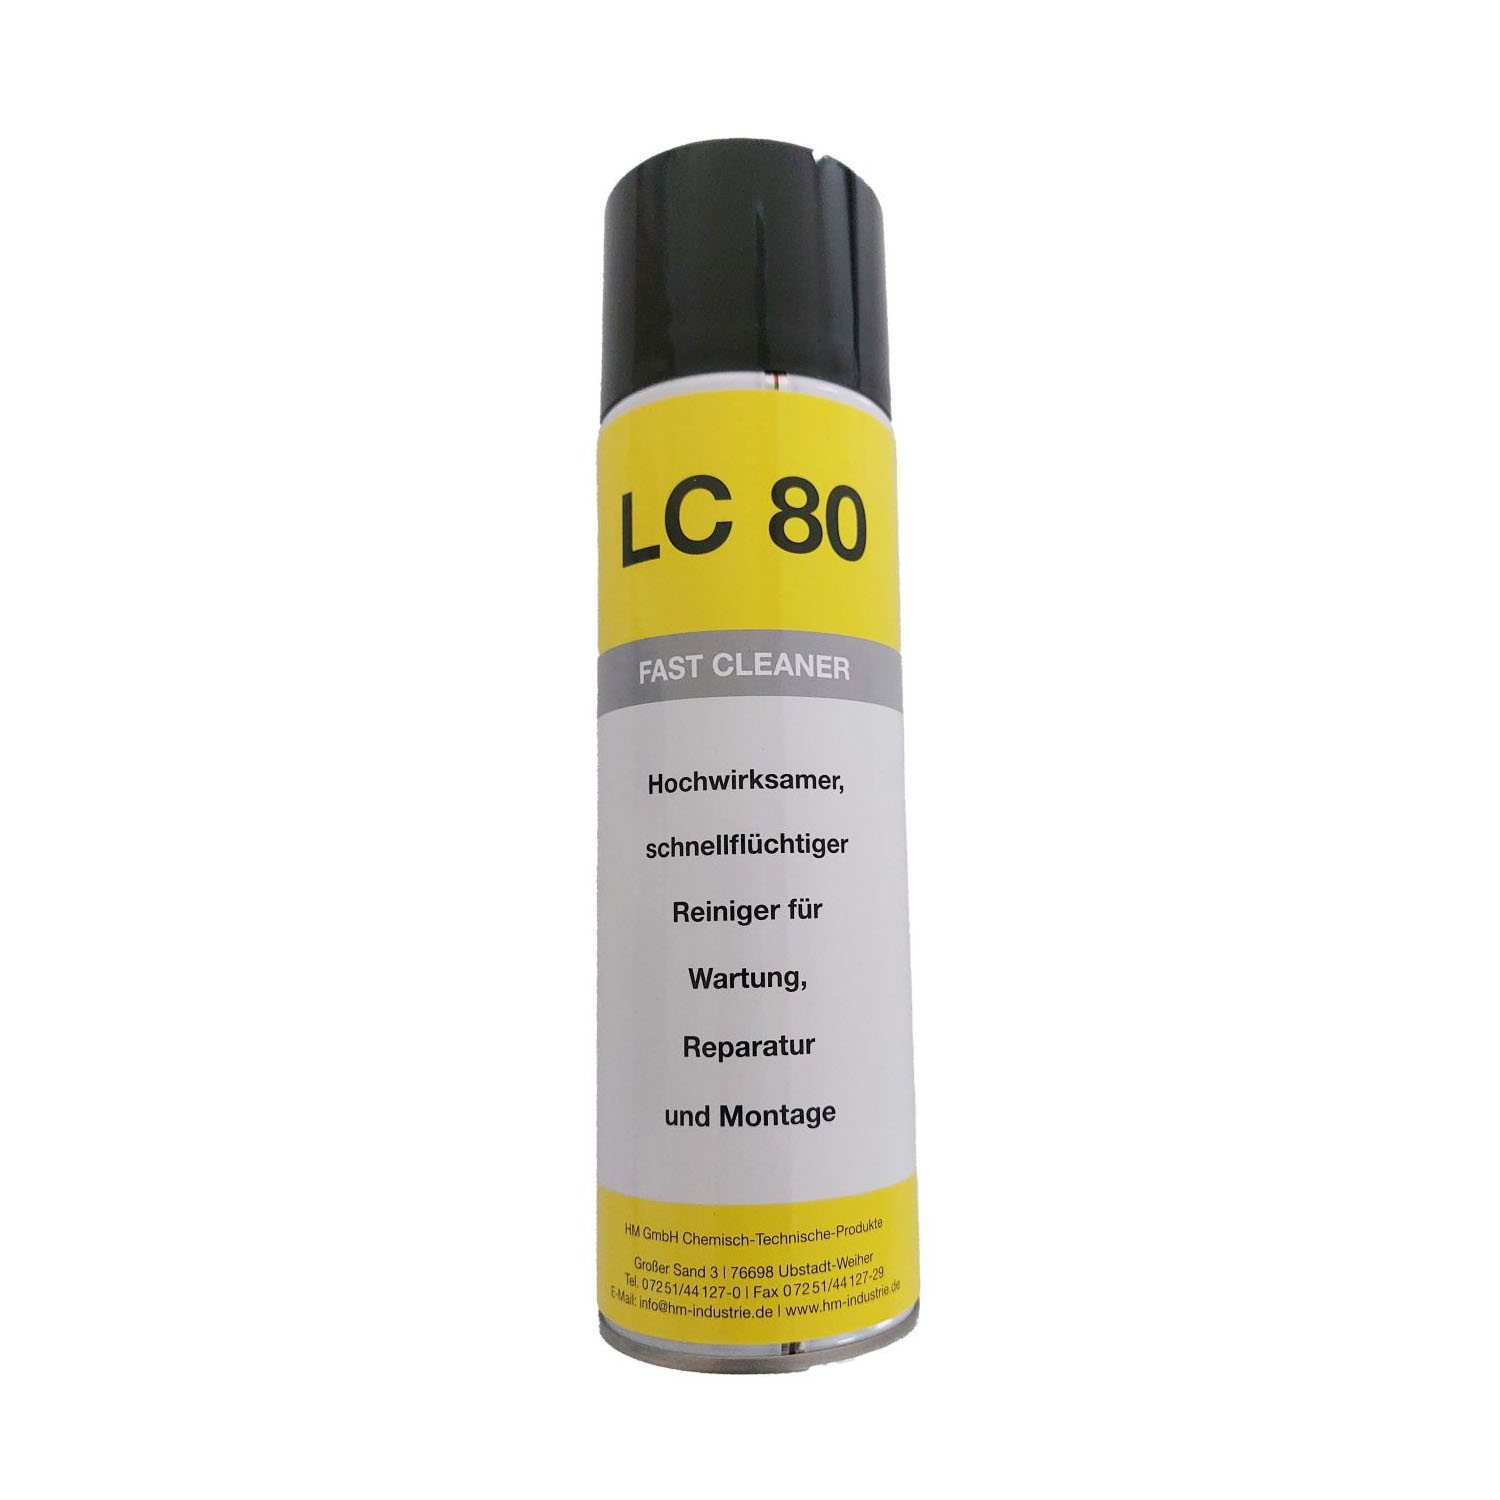 LC 80 Fast Cleaner